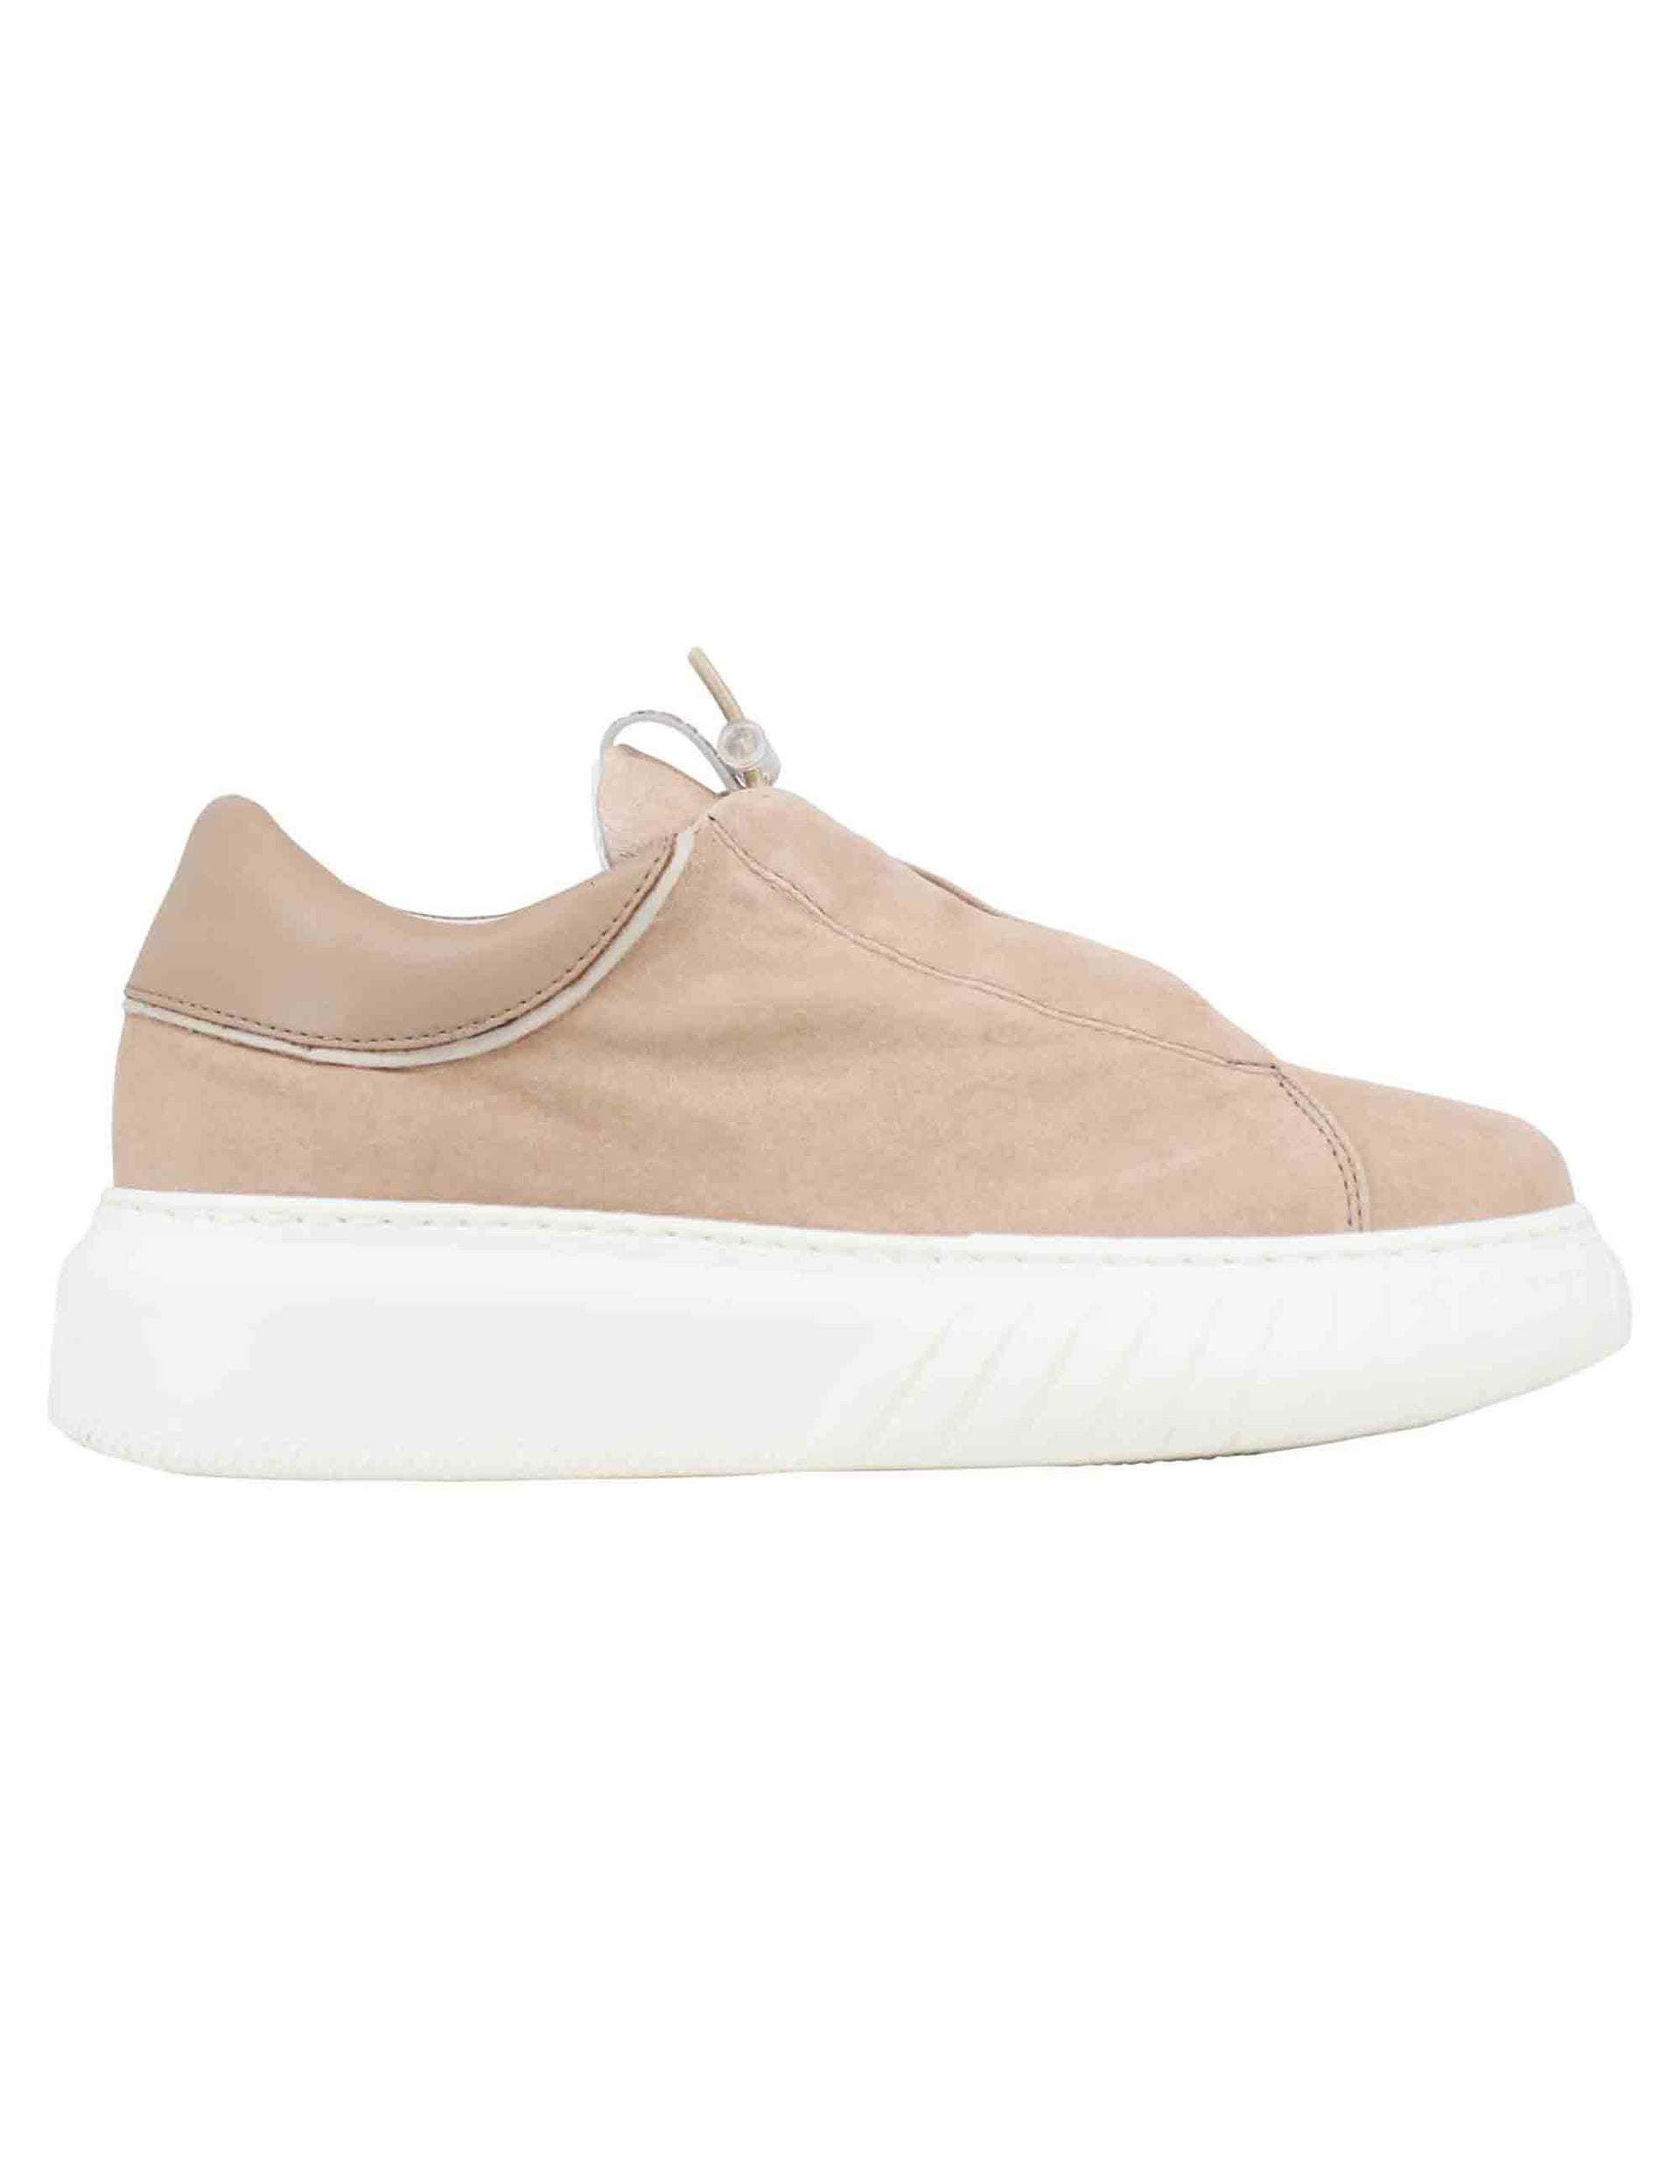 Women's sneakers in powder pink suede with high rubber sole